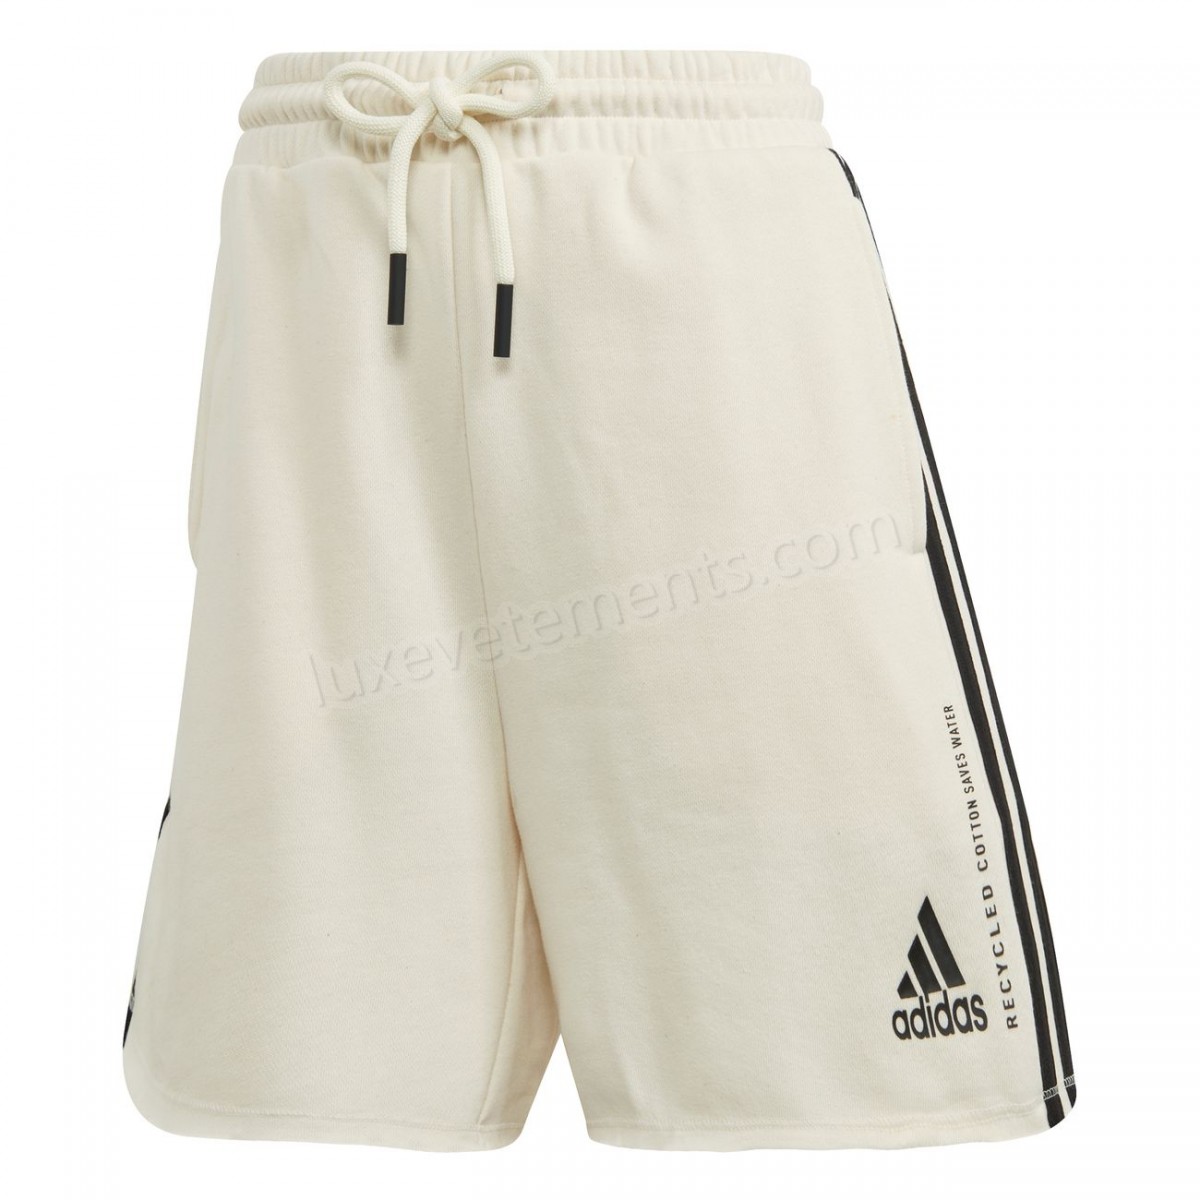 Adidas-Fitness femme ADIDAS Short femme adidas Must Haves Recycled Cotton Vente en ligne - -1